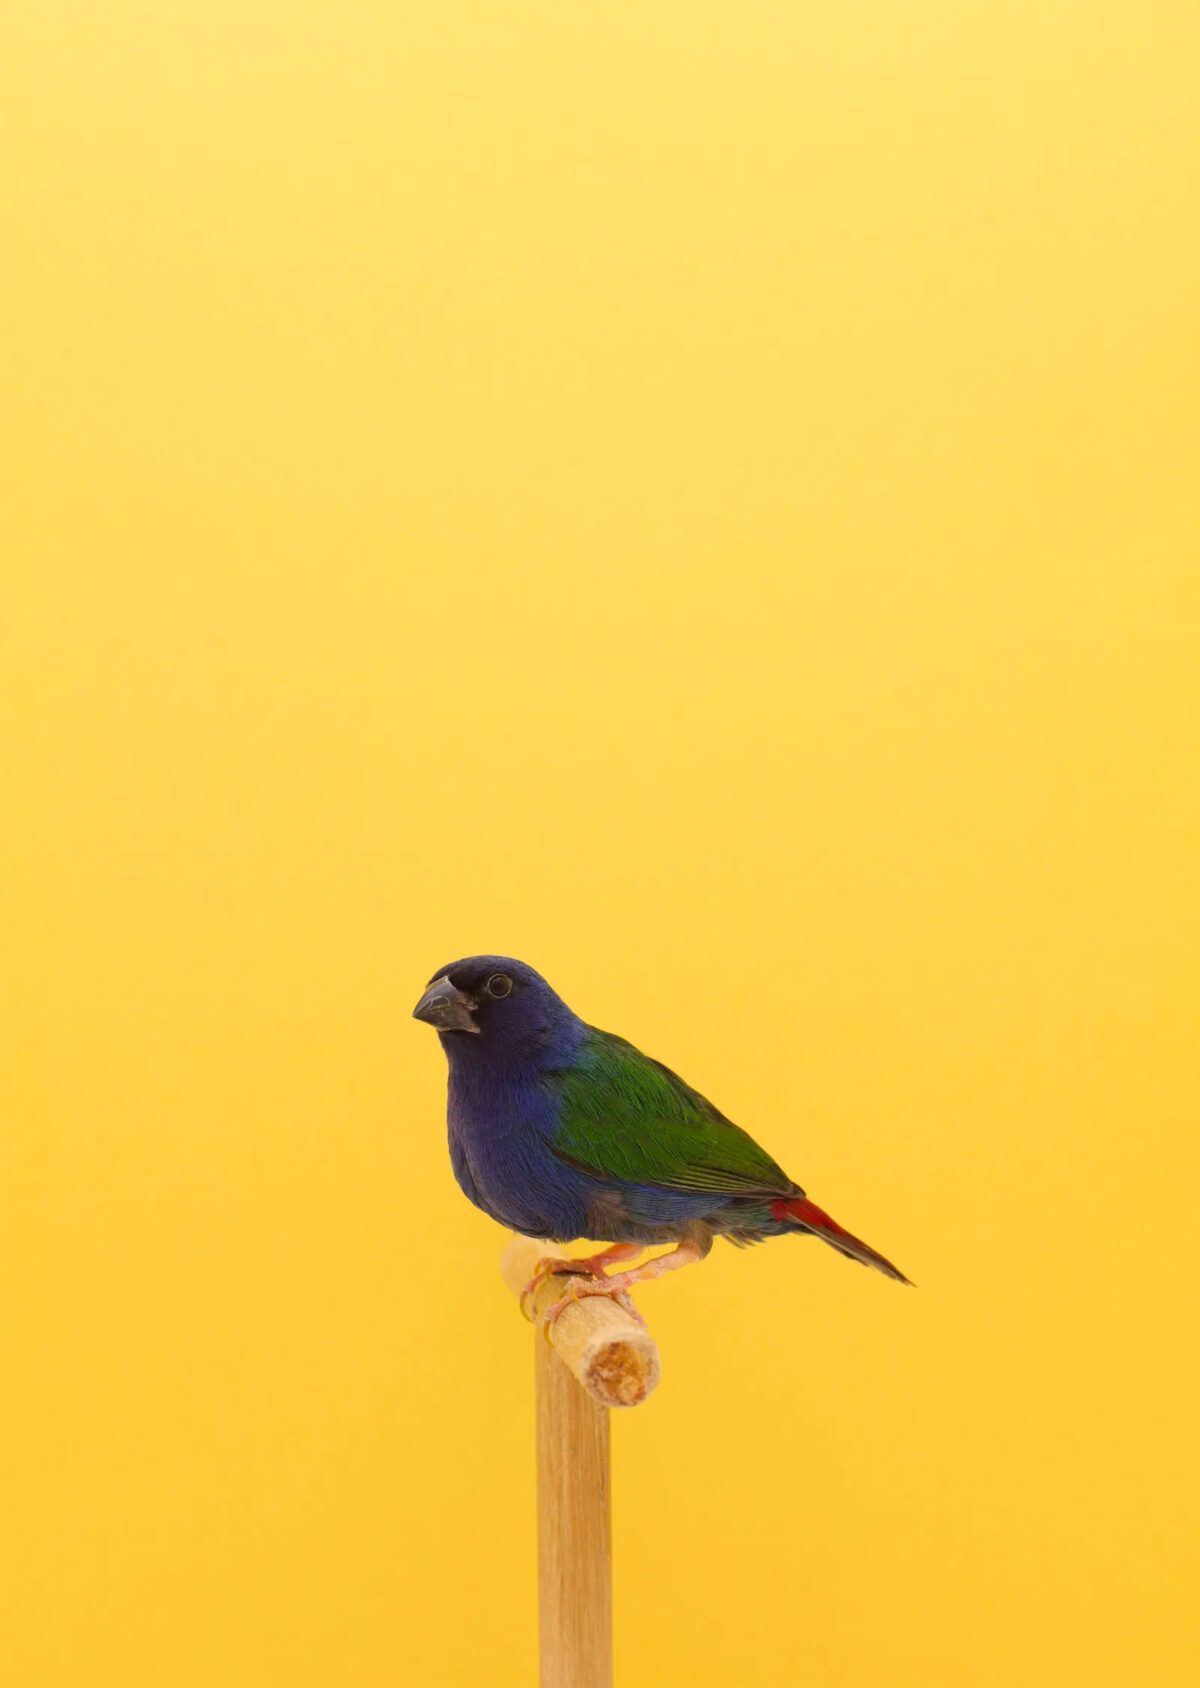 An Incomplete Dictionary Of Show Birds A Minimalist Bird Photography Series By Luke Stephenson (6)